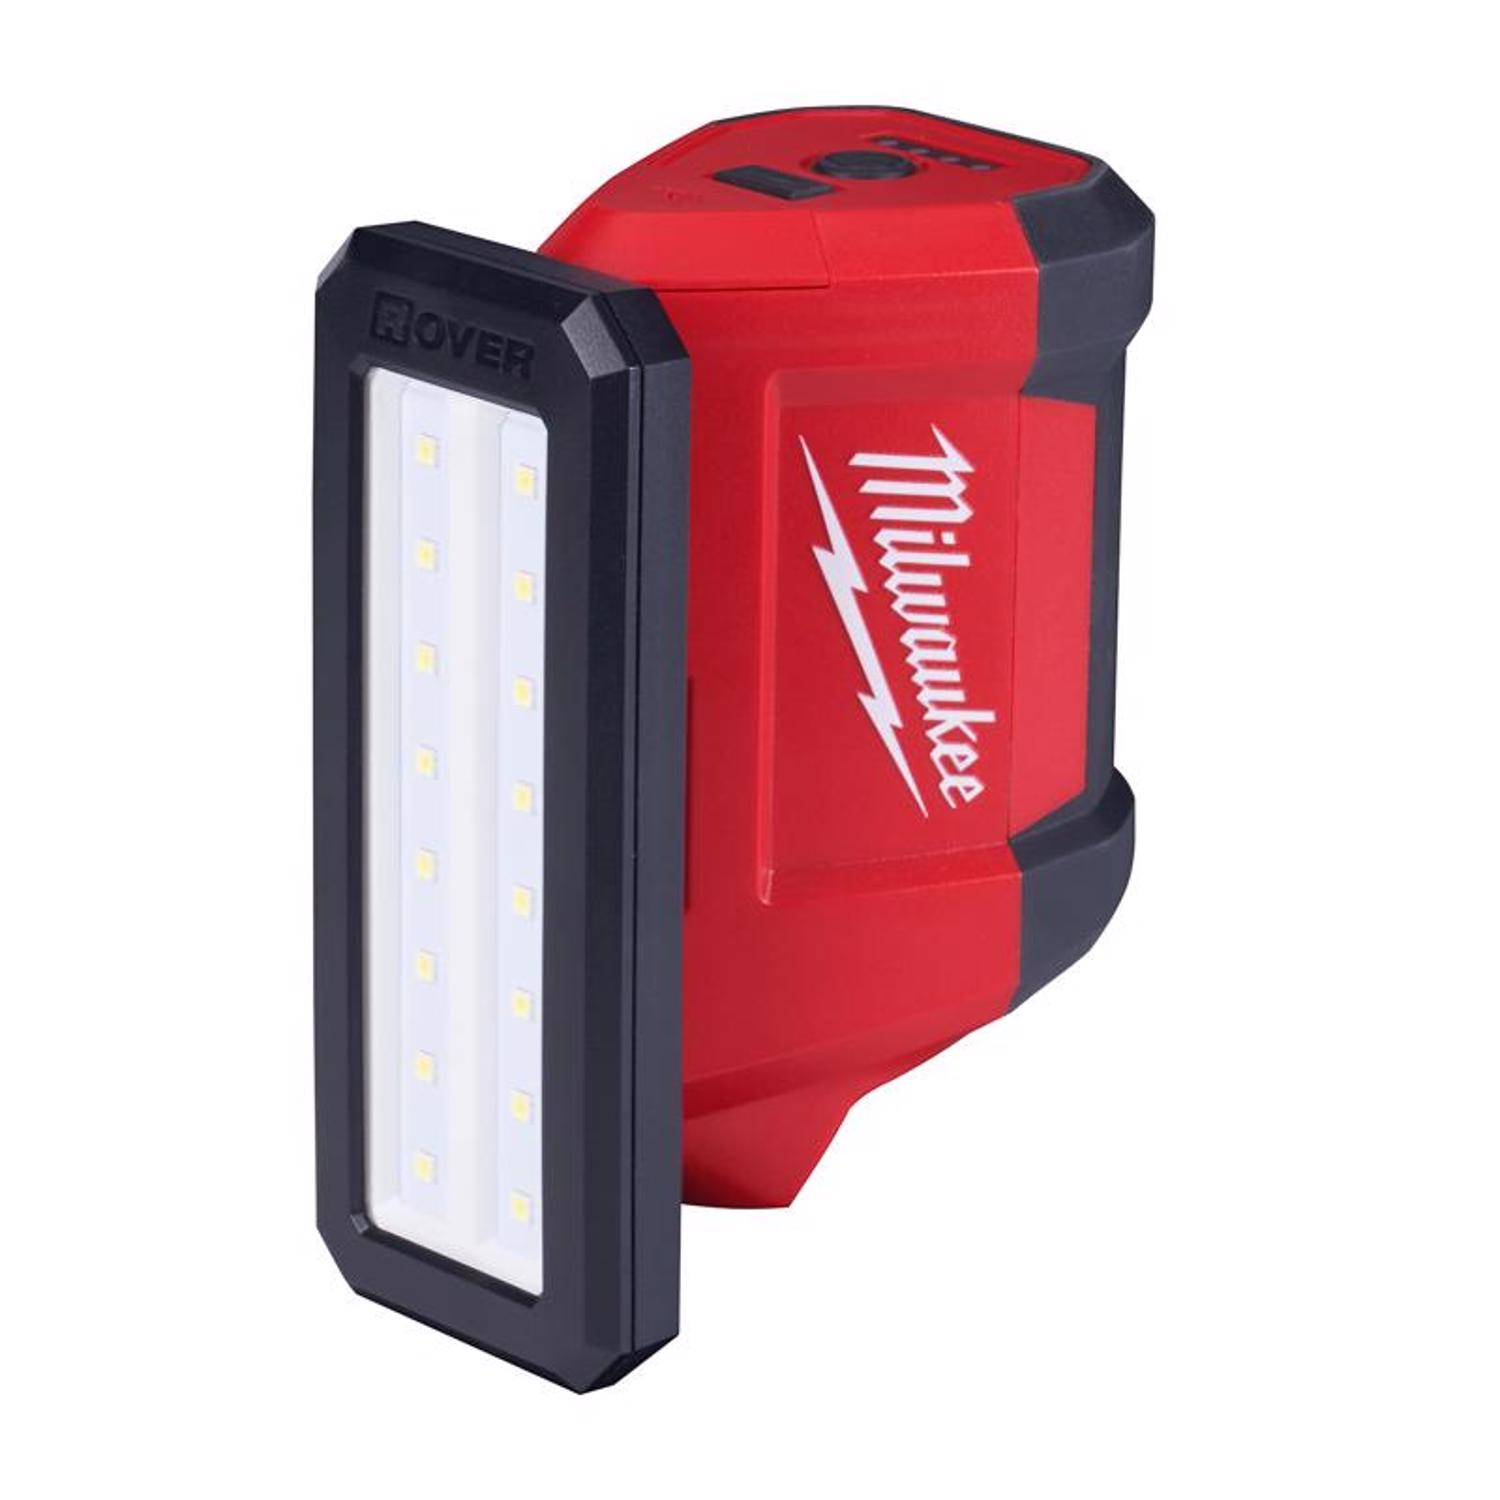 Photos - Battery Charger Milwaukee M12 Rover 700/250 lm LED Rechargeable Handheld Flood Light 2367 